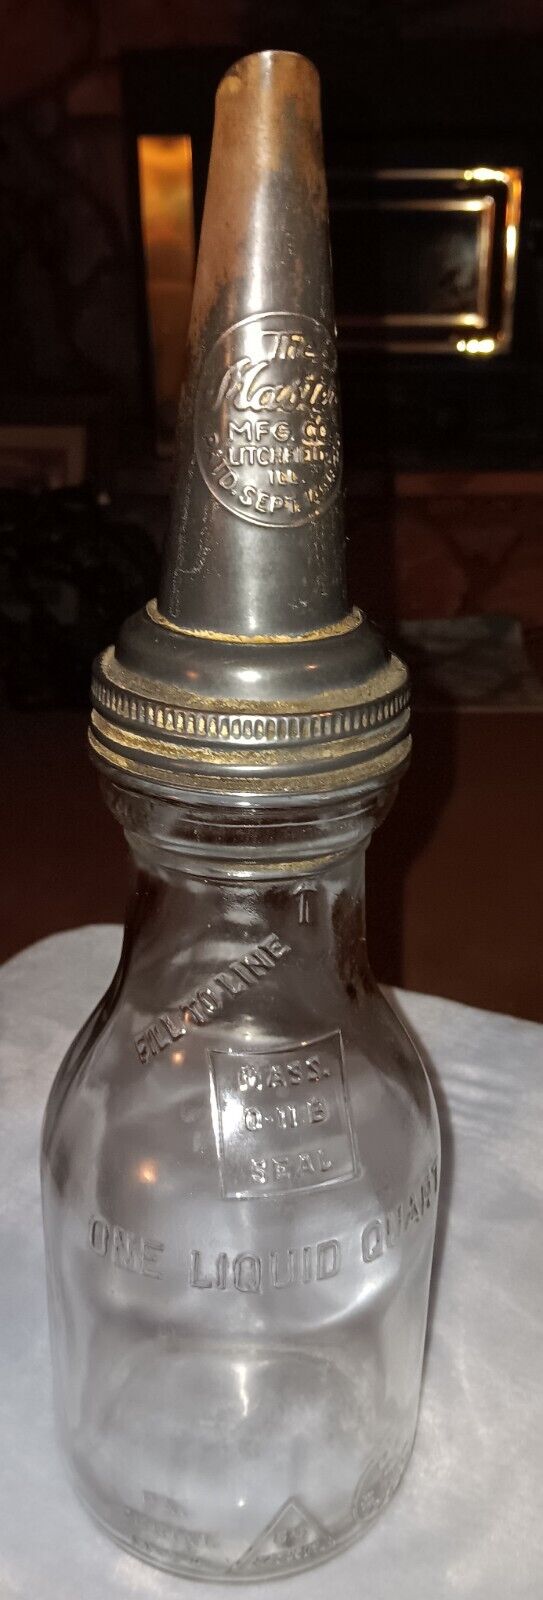 Price Cut In Half the master oil bottle 1926 No Chips Or Cracks